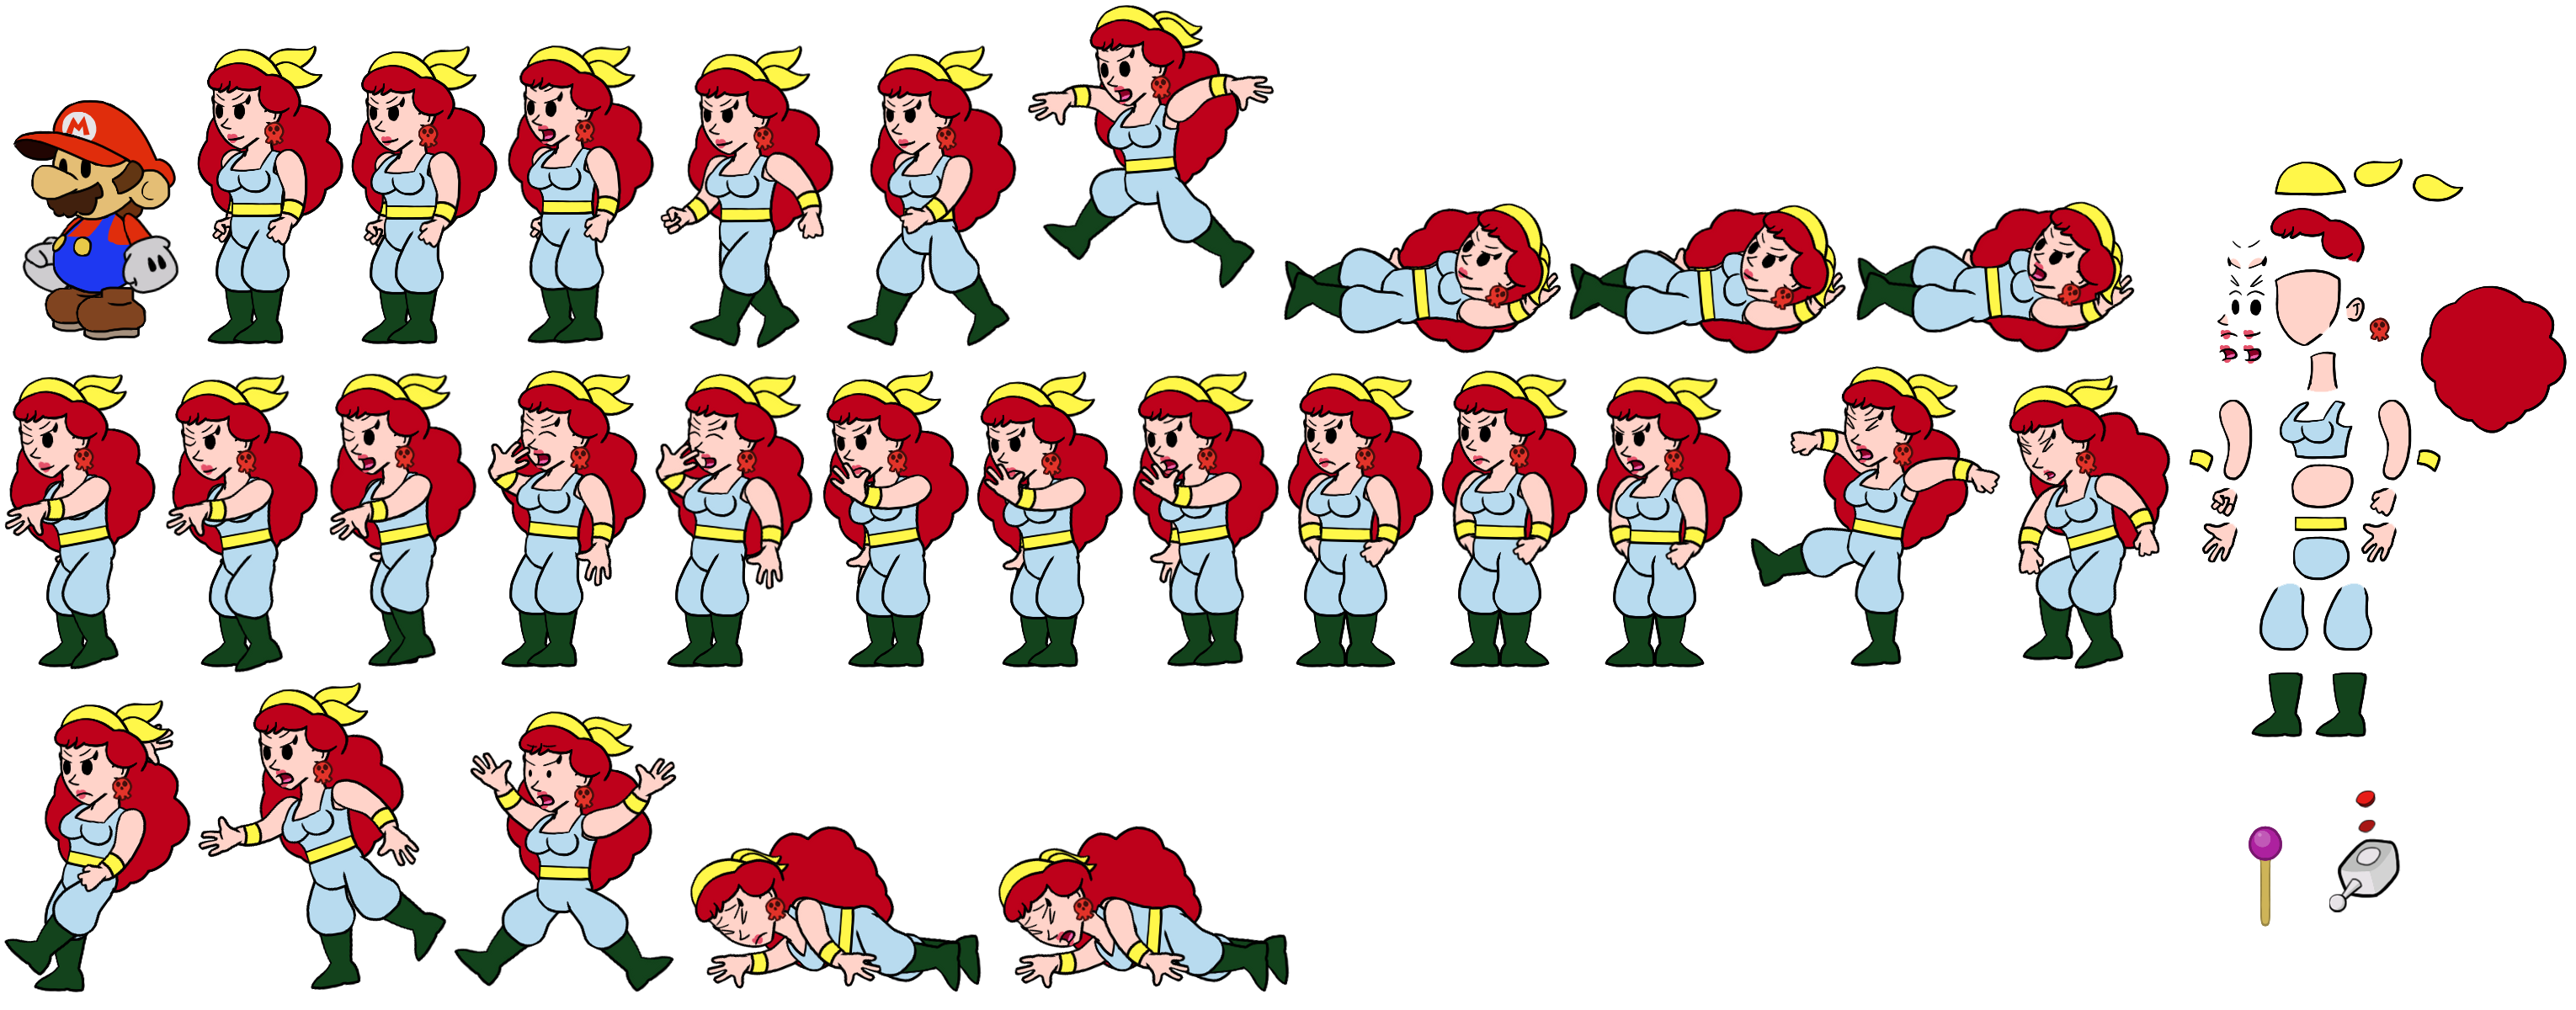 Captain Syrup (Paper Mario-Style, Classic)